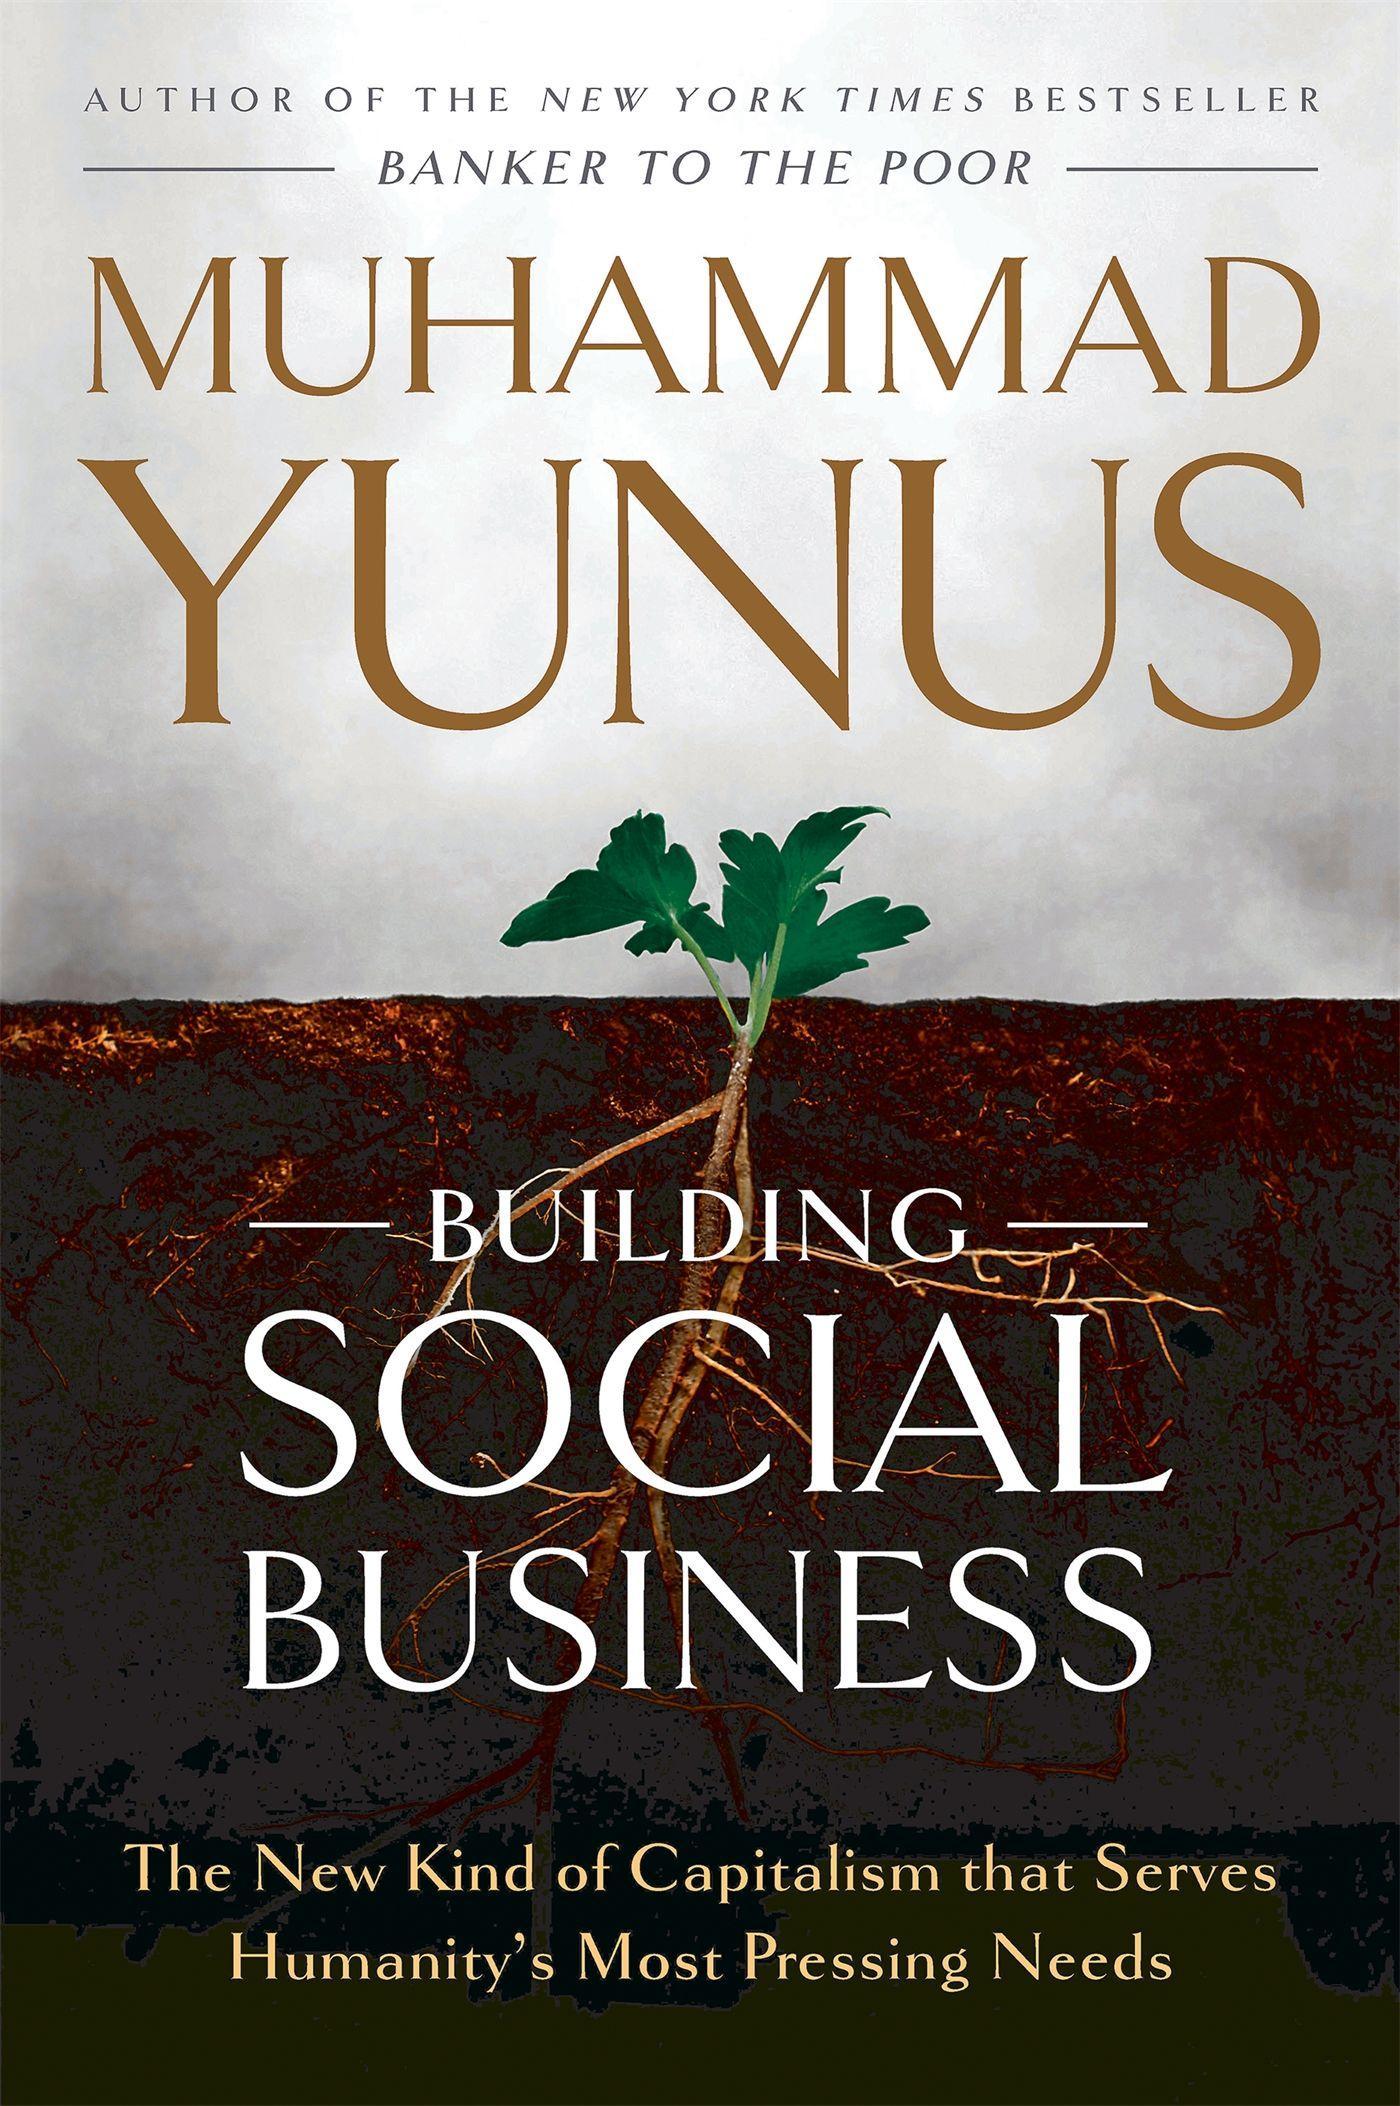 Building Social Business | The New Kind of Capitalism that Serves Humanity’s Most Pressing Needs | Muhammad Yunus | Taschenbuch | 227 S. | Englisch | 2011 | Hachette Book Group USA | EAN 9781586489564 - Yunus, Muhammad